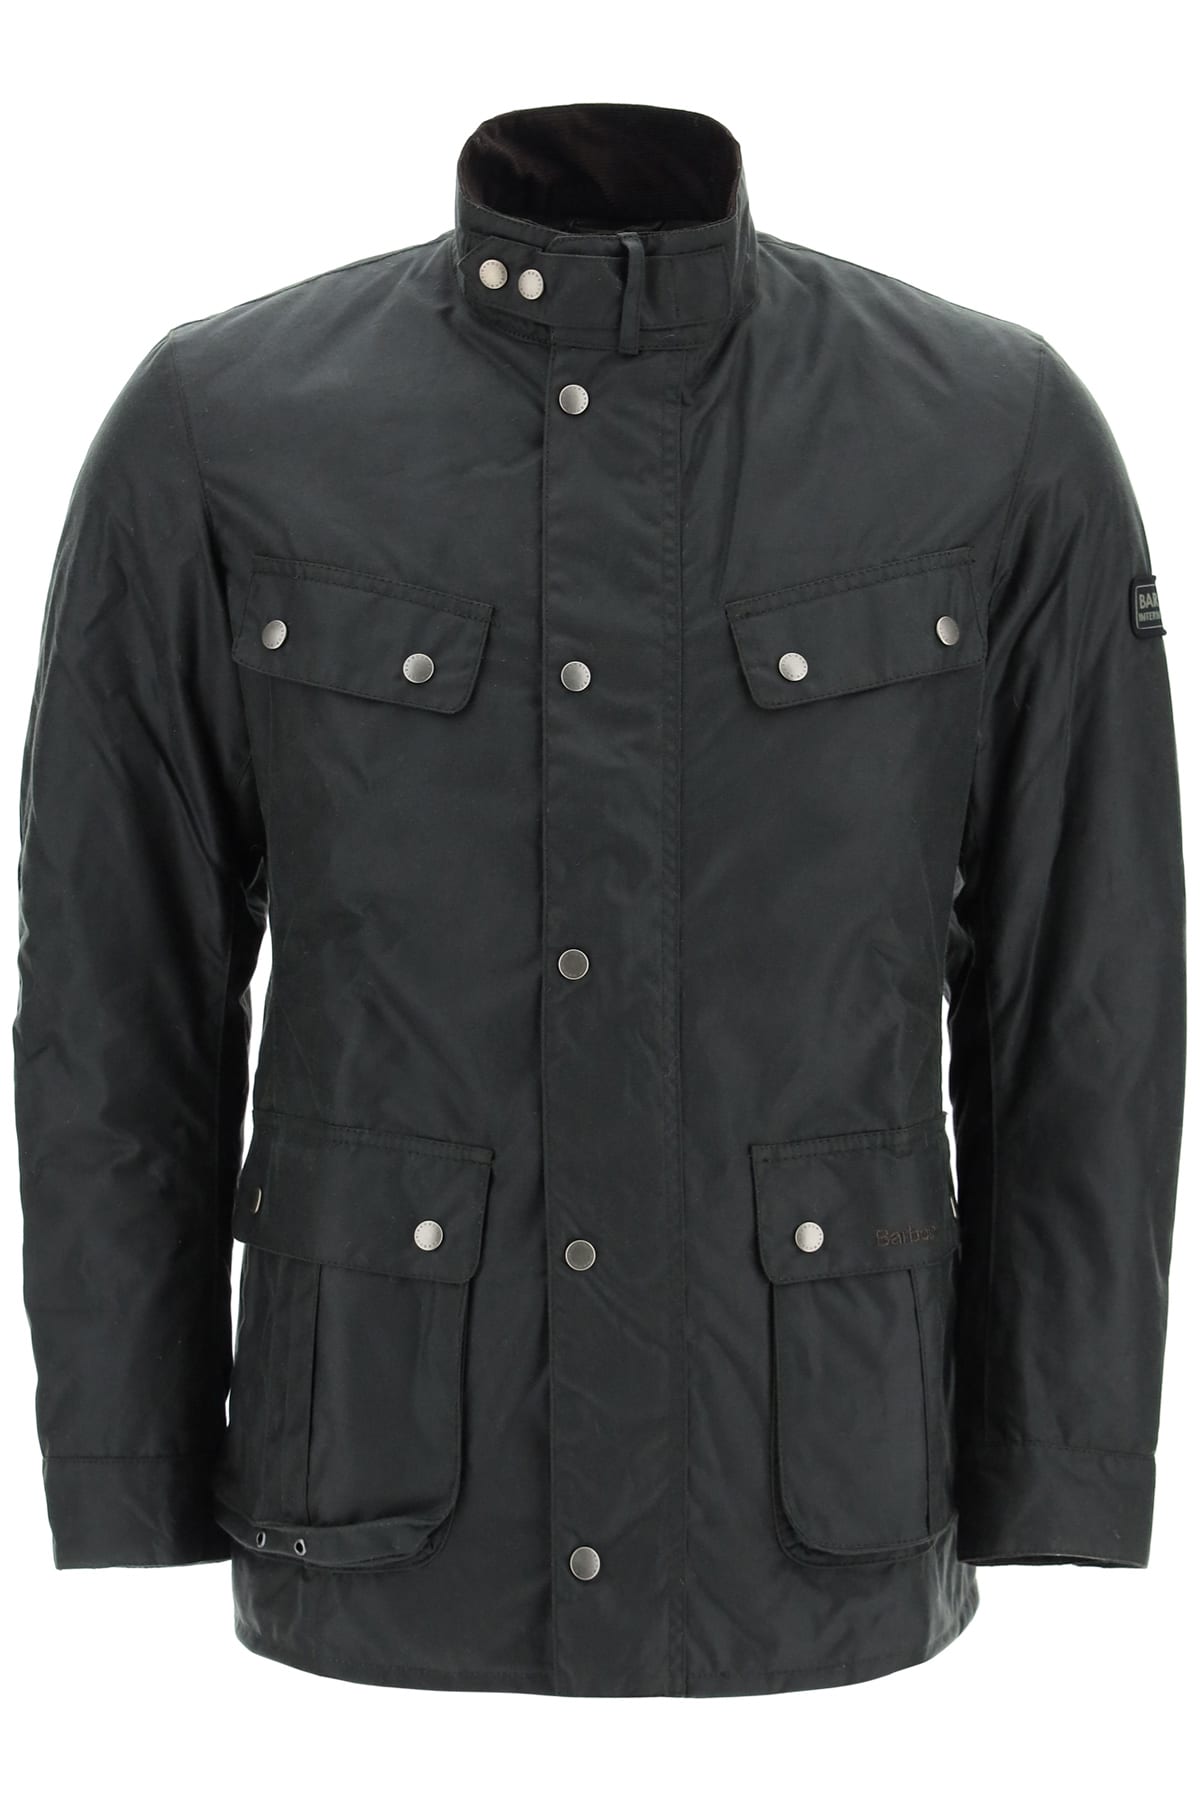 Barbour Duke Jacket In Waxed Cotton